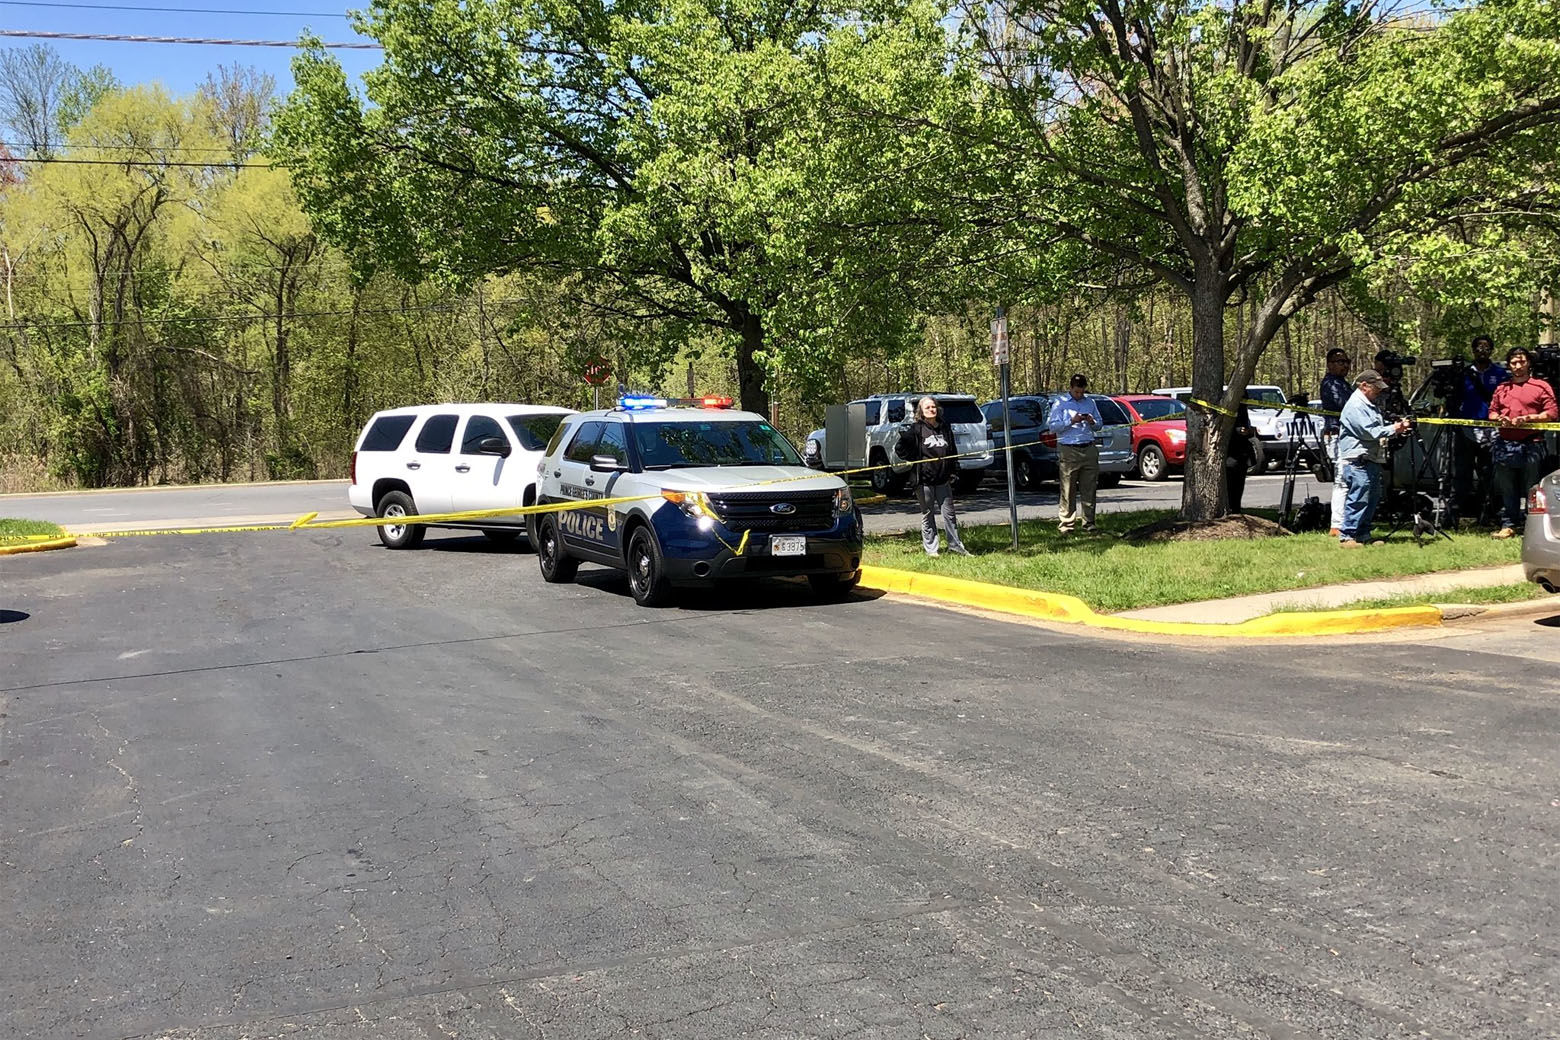 The media staging area in a parking lot in the 5800 block of Cherrywood Lane in Greenbelt, Maryland, where an armed robbery suspect was shot by a Prince George's County police officer during an arrest. (Courtesy Prince George's County police)